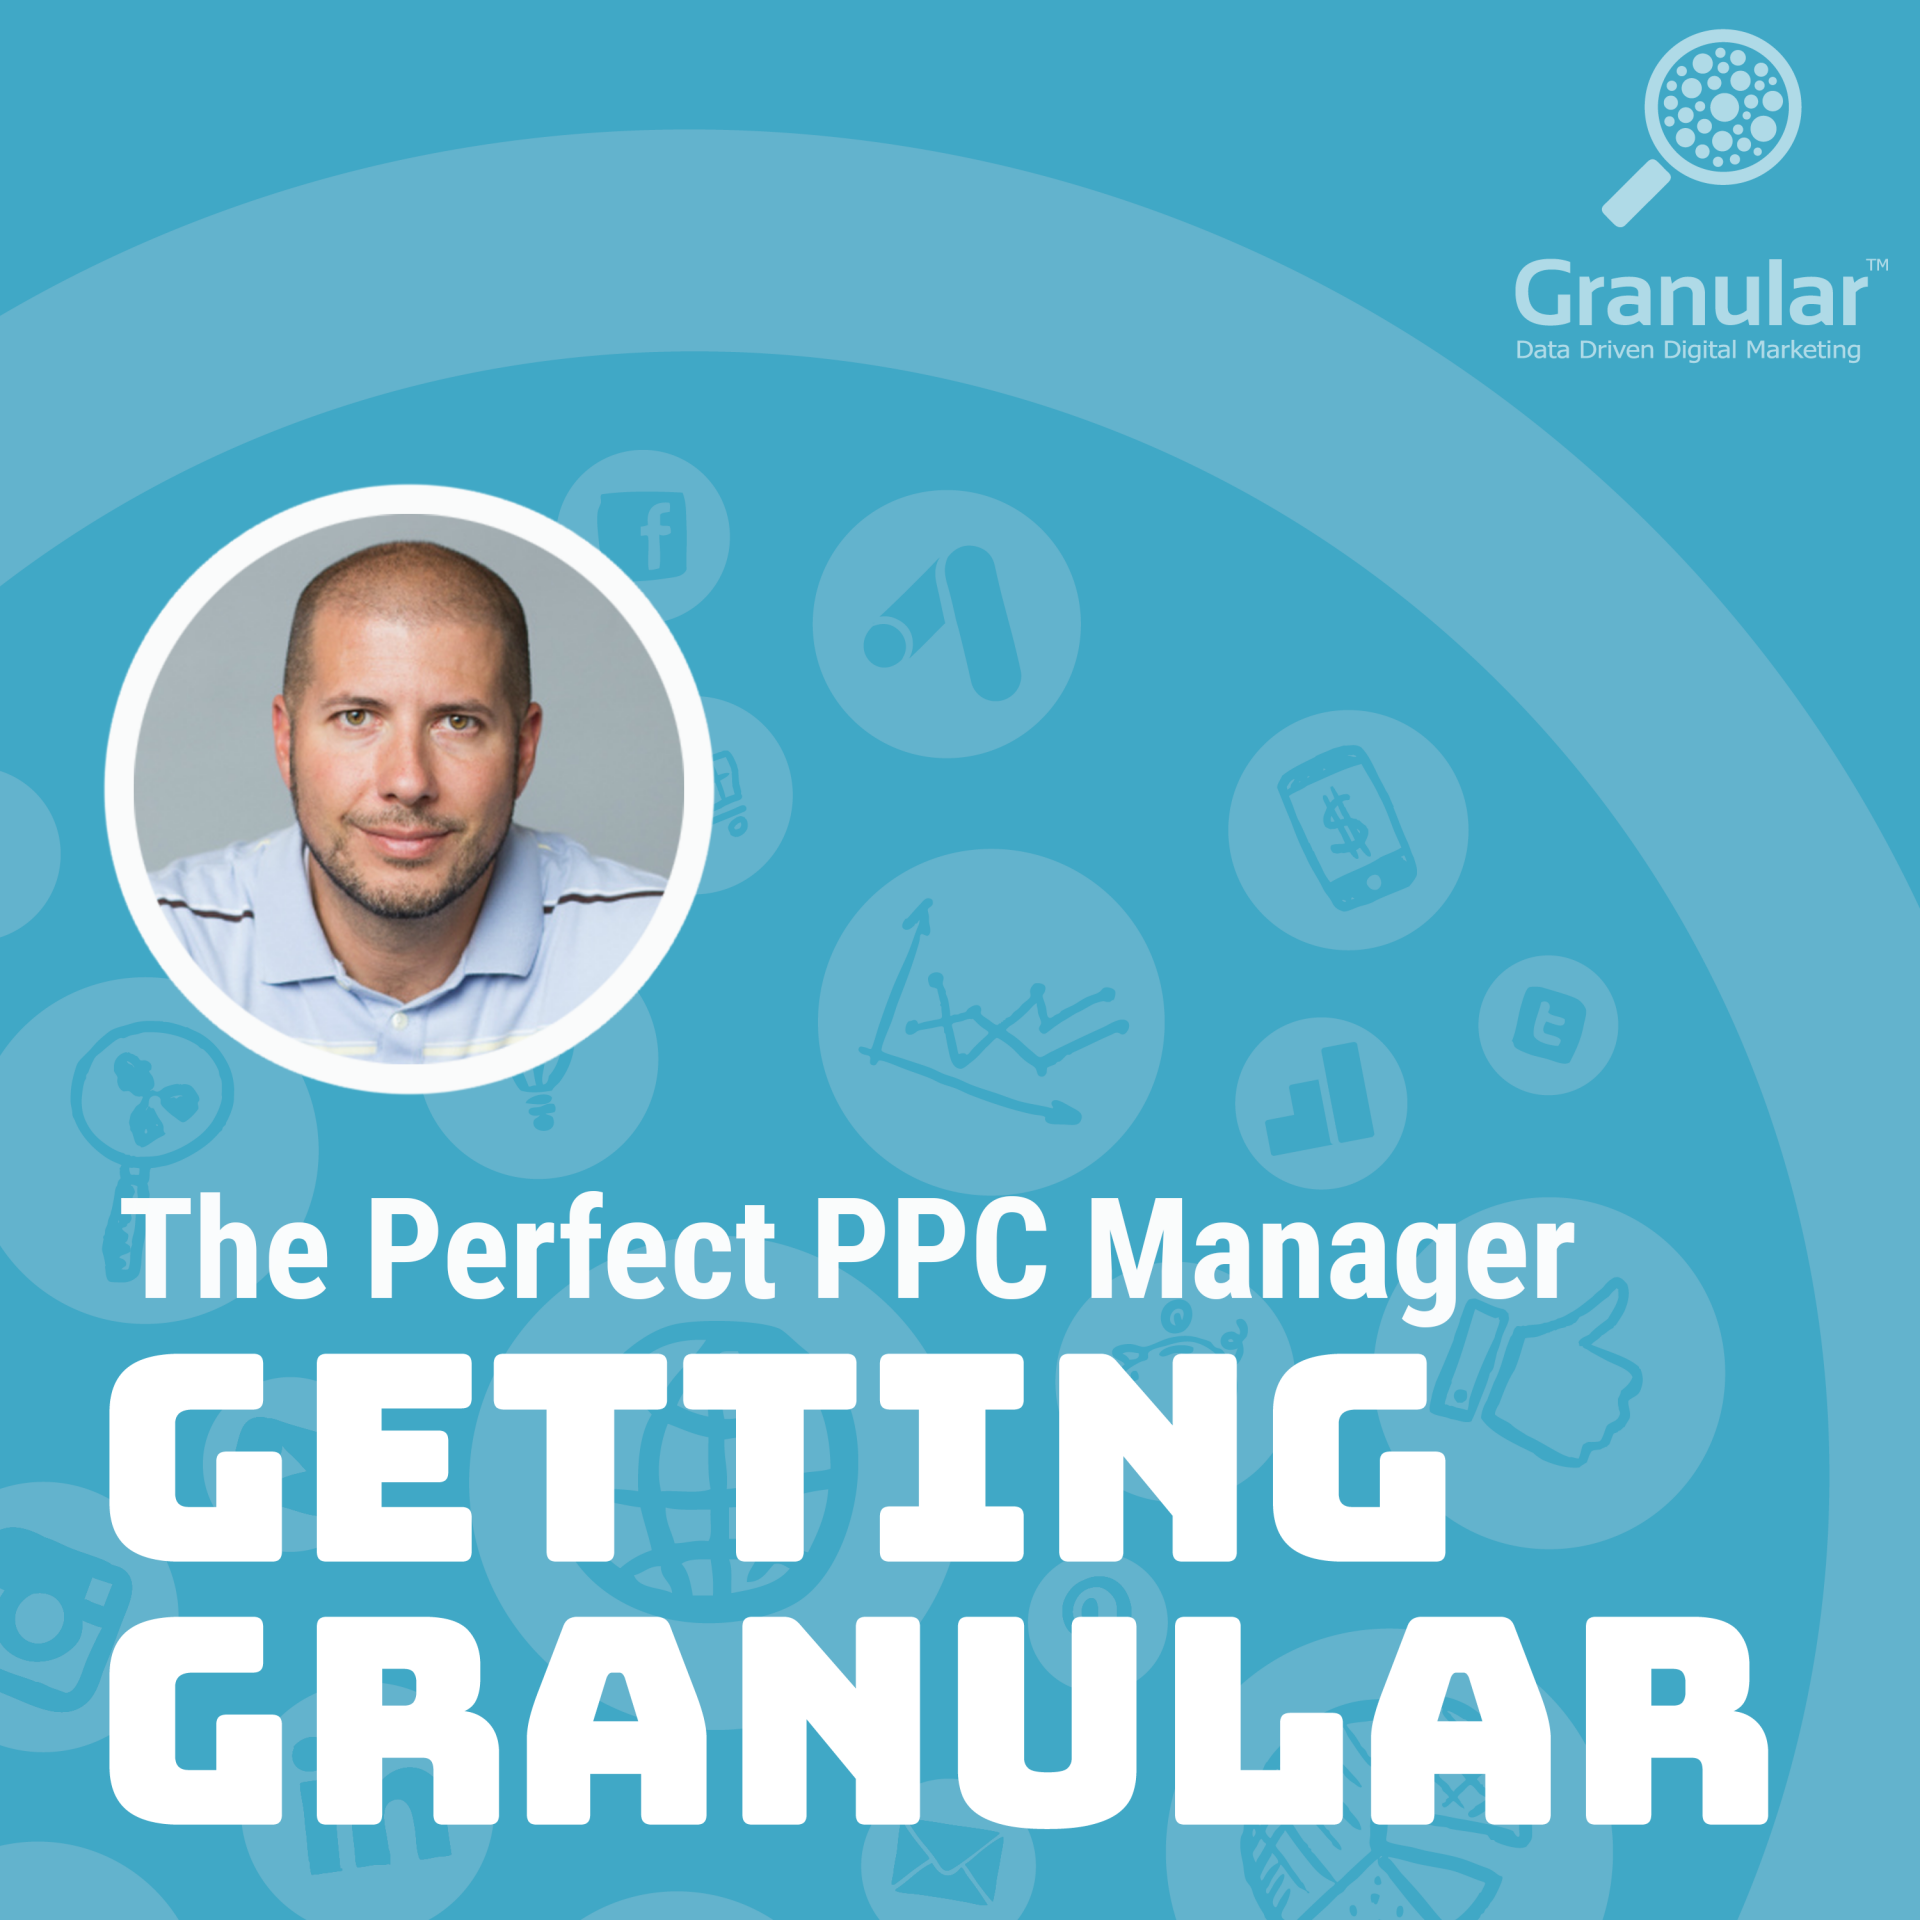 Granular Podcast: Getting Granular - The Perfect PPC Manager